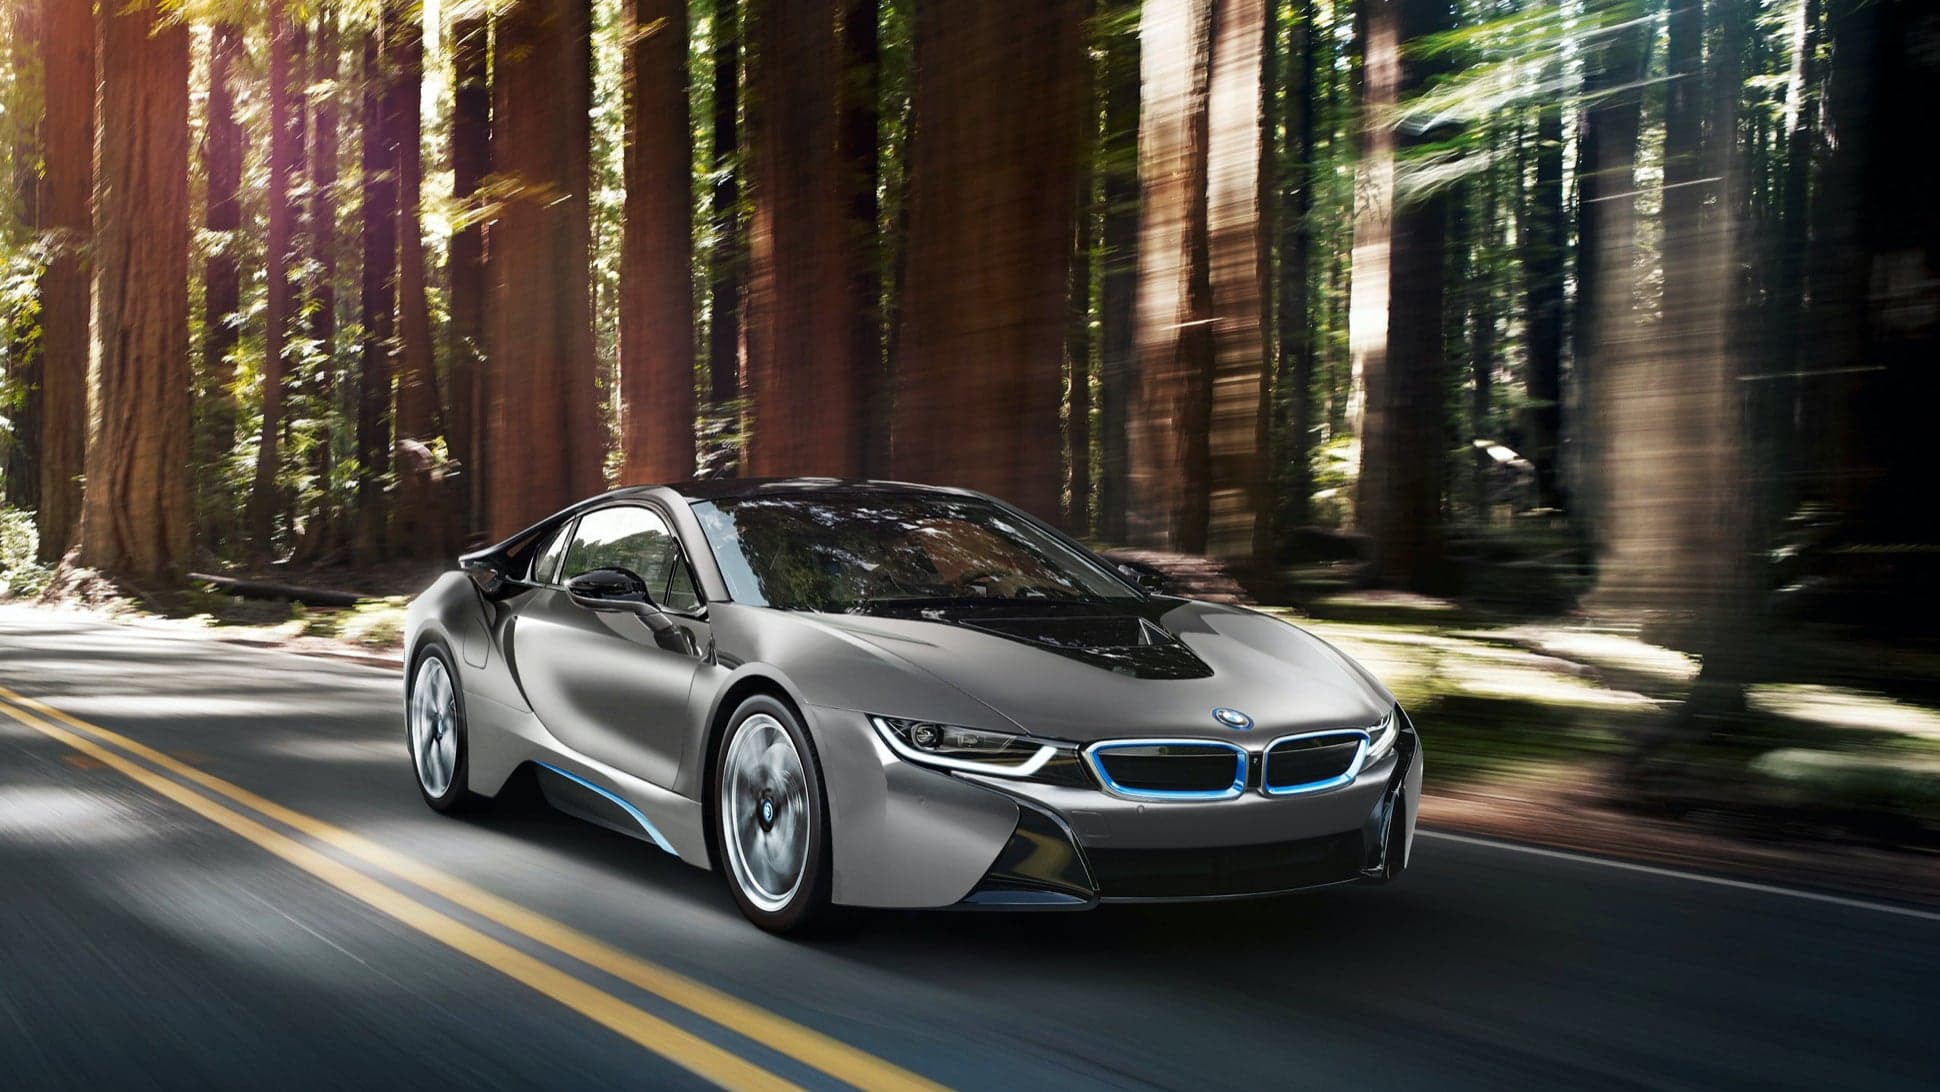 BMW Could Make a McLaren-Trolling Hybrid Supercar With Twice the Power of the i8